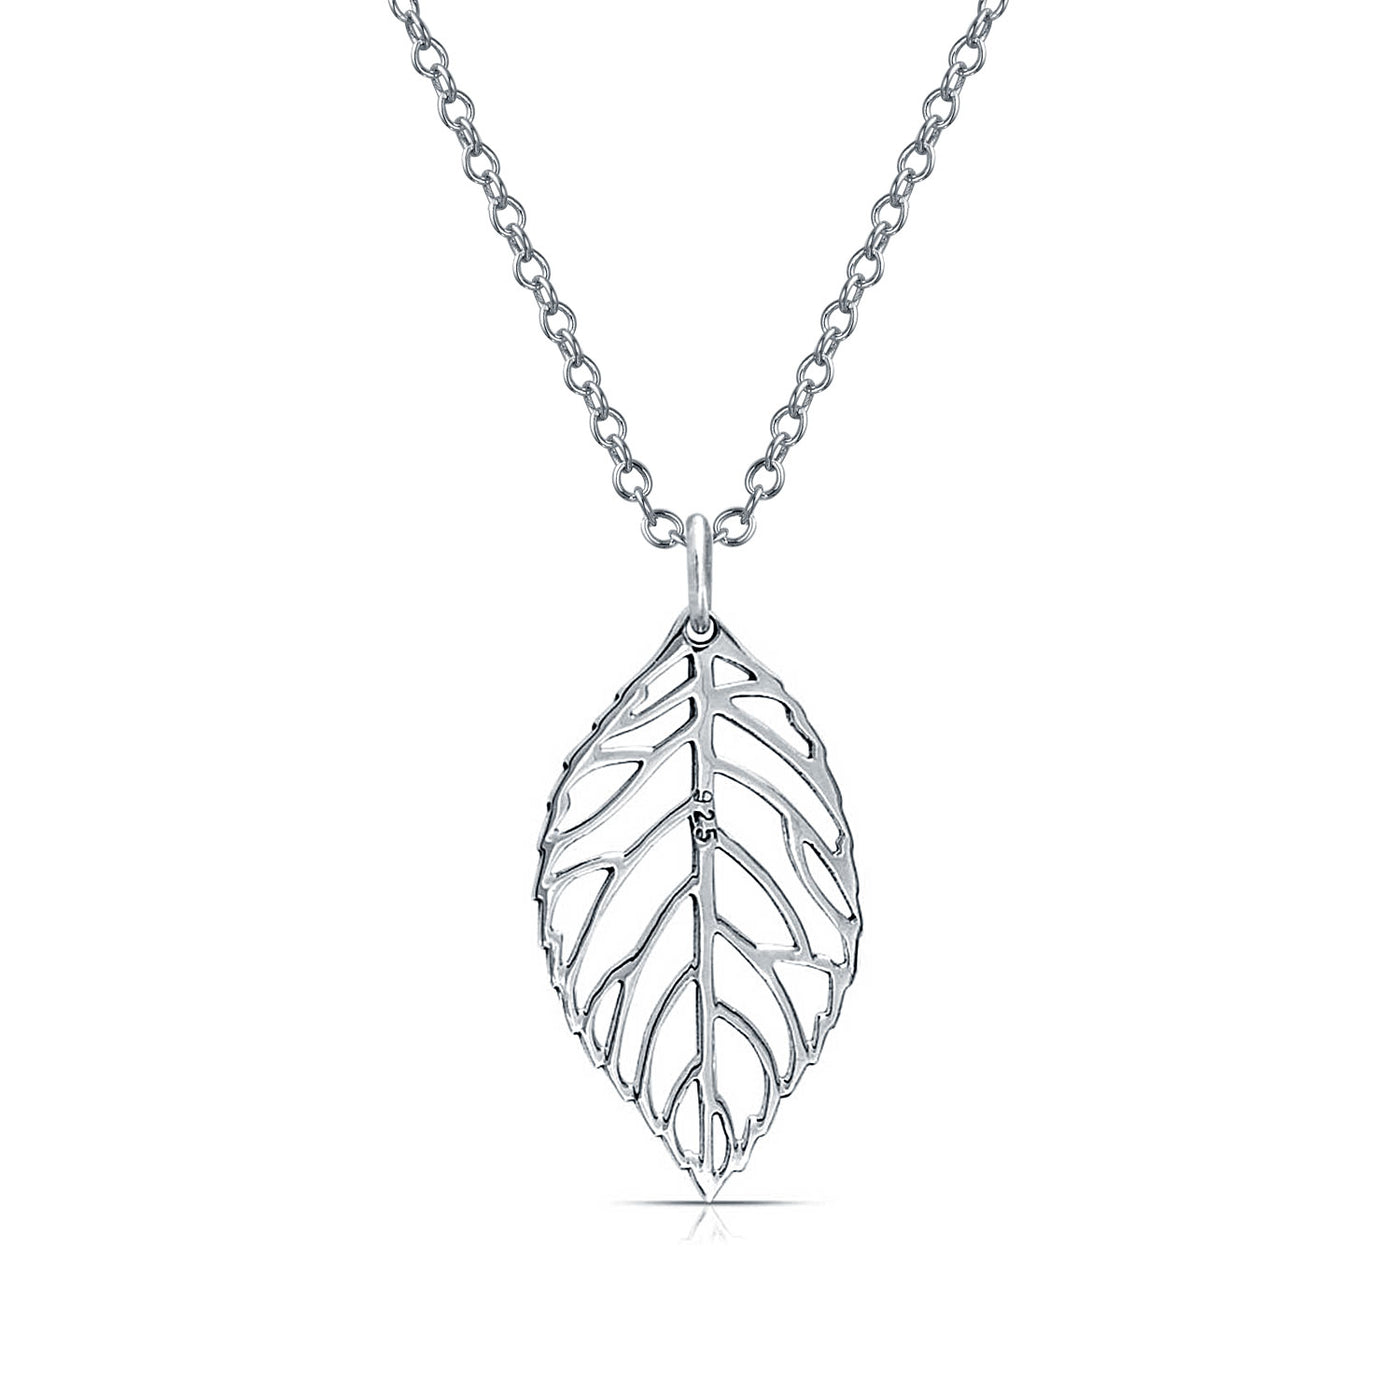 Western Jewelry Leaf Dangling Pendant Necklace .925 Sterling Silver